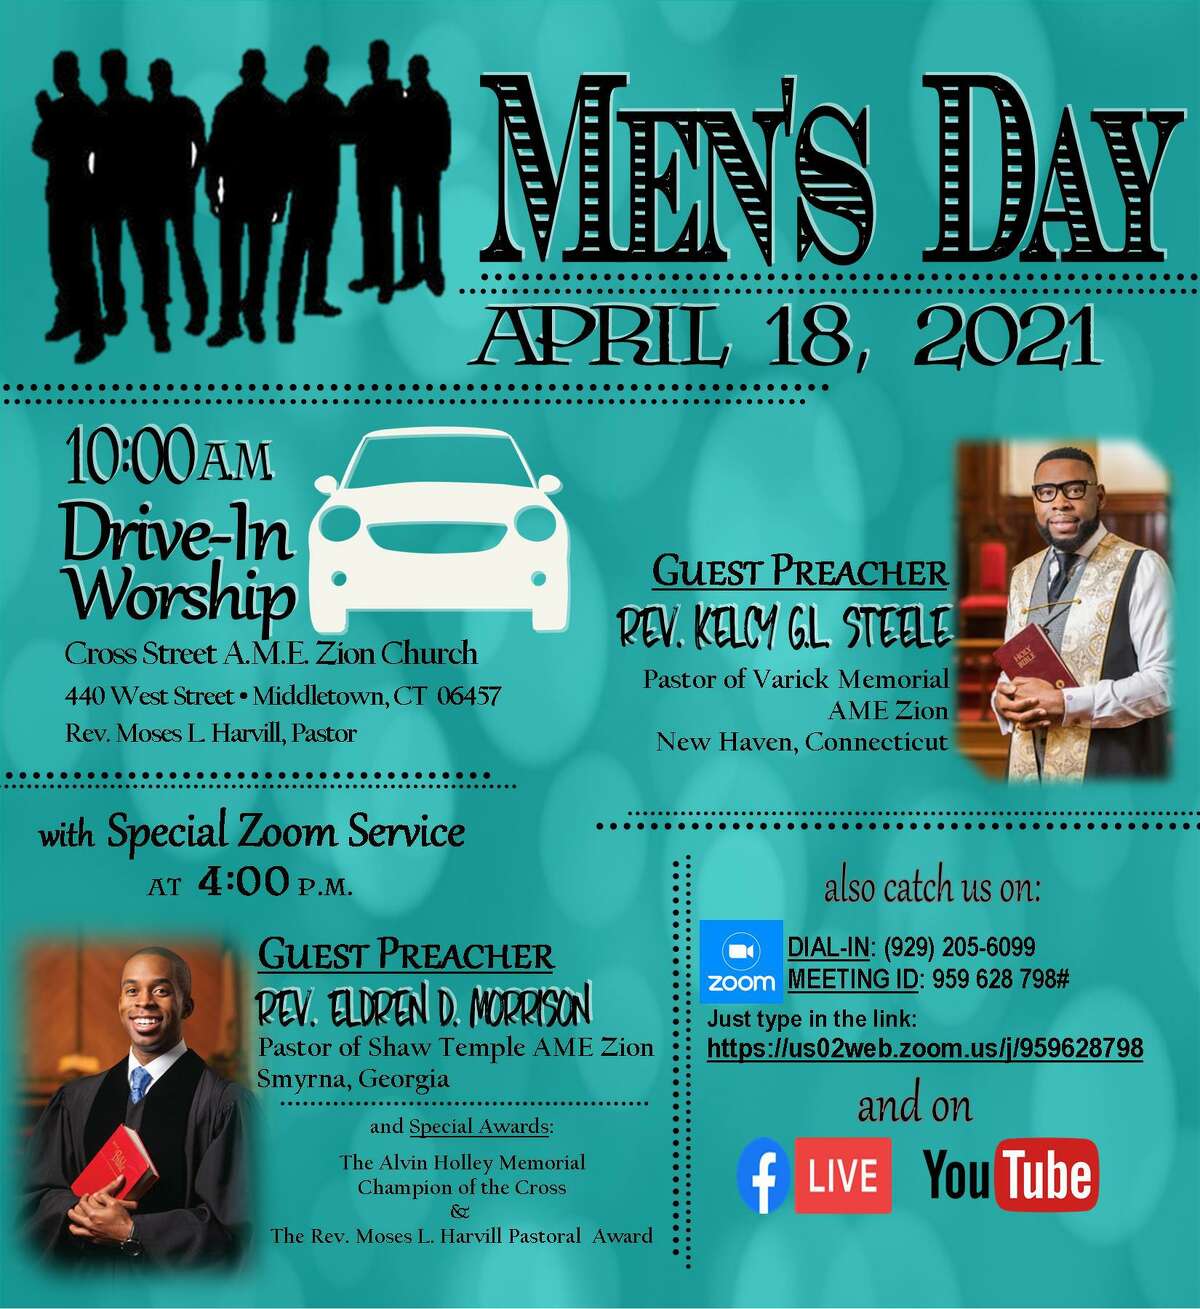 Cross Street AME Zion Church, 440 West St., Middletown, will host drive-in and Zoom worship services Sunday in honor of Men’s Day. Two awards will also be given out for the occasion.